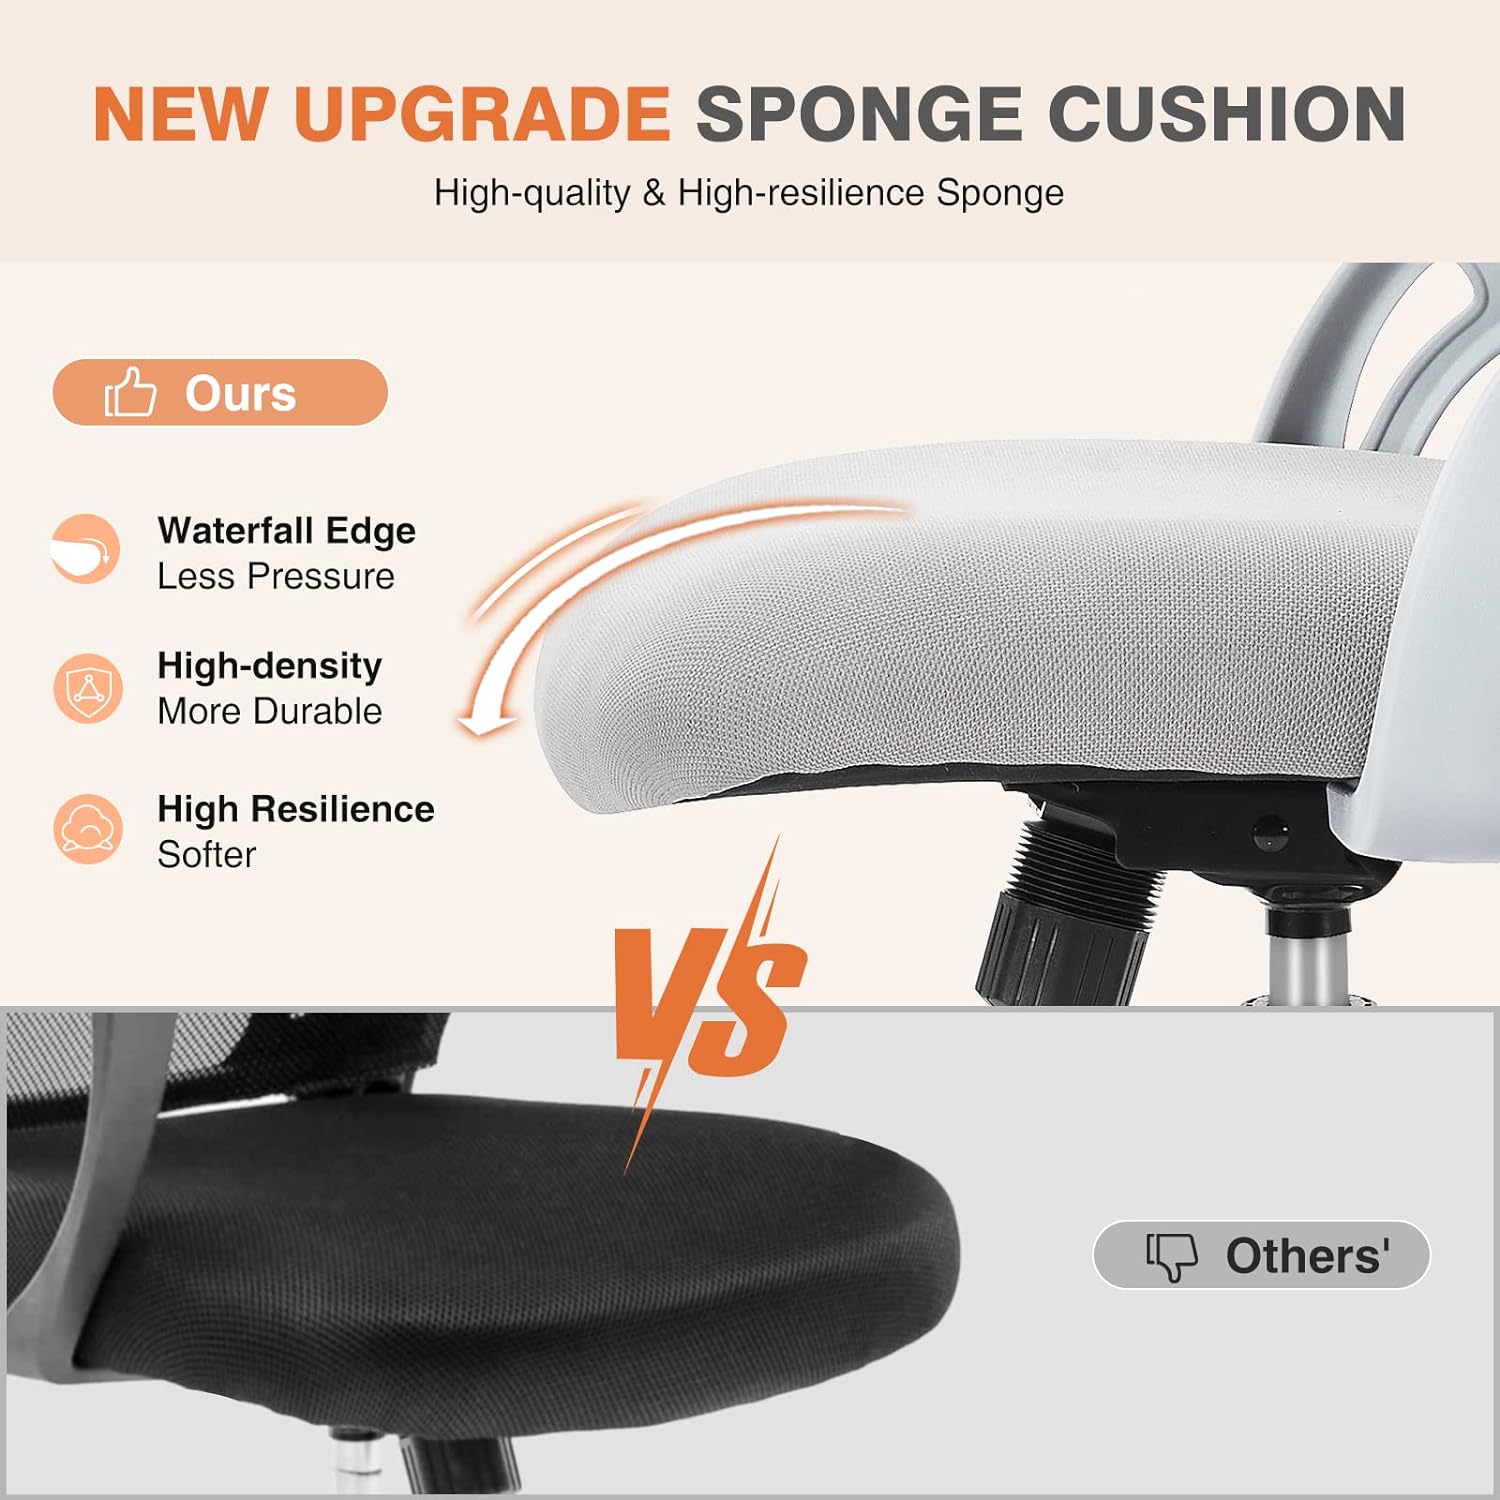 GREY ARMCHAIR BACK SUPPORT CUSHION | Sofa Cushion Support Chair Posture  Support